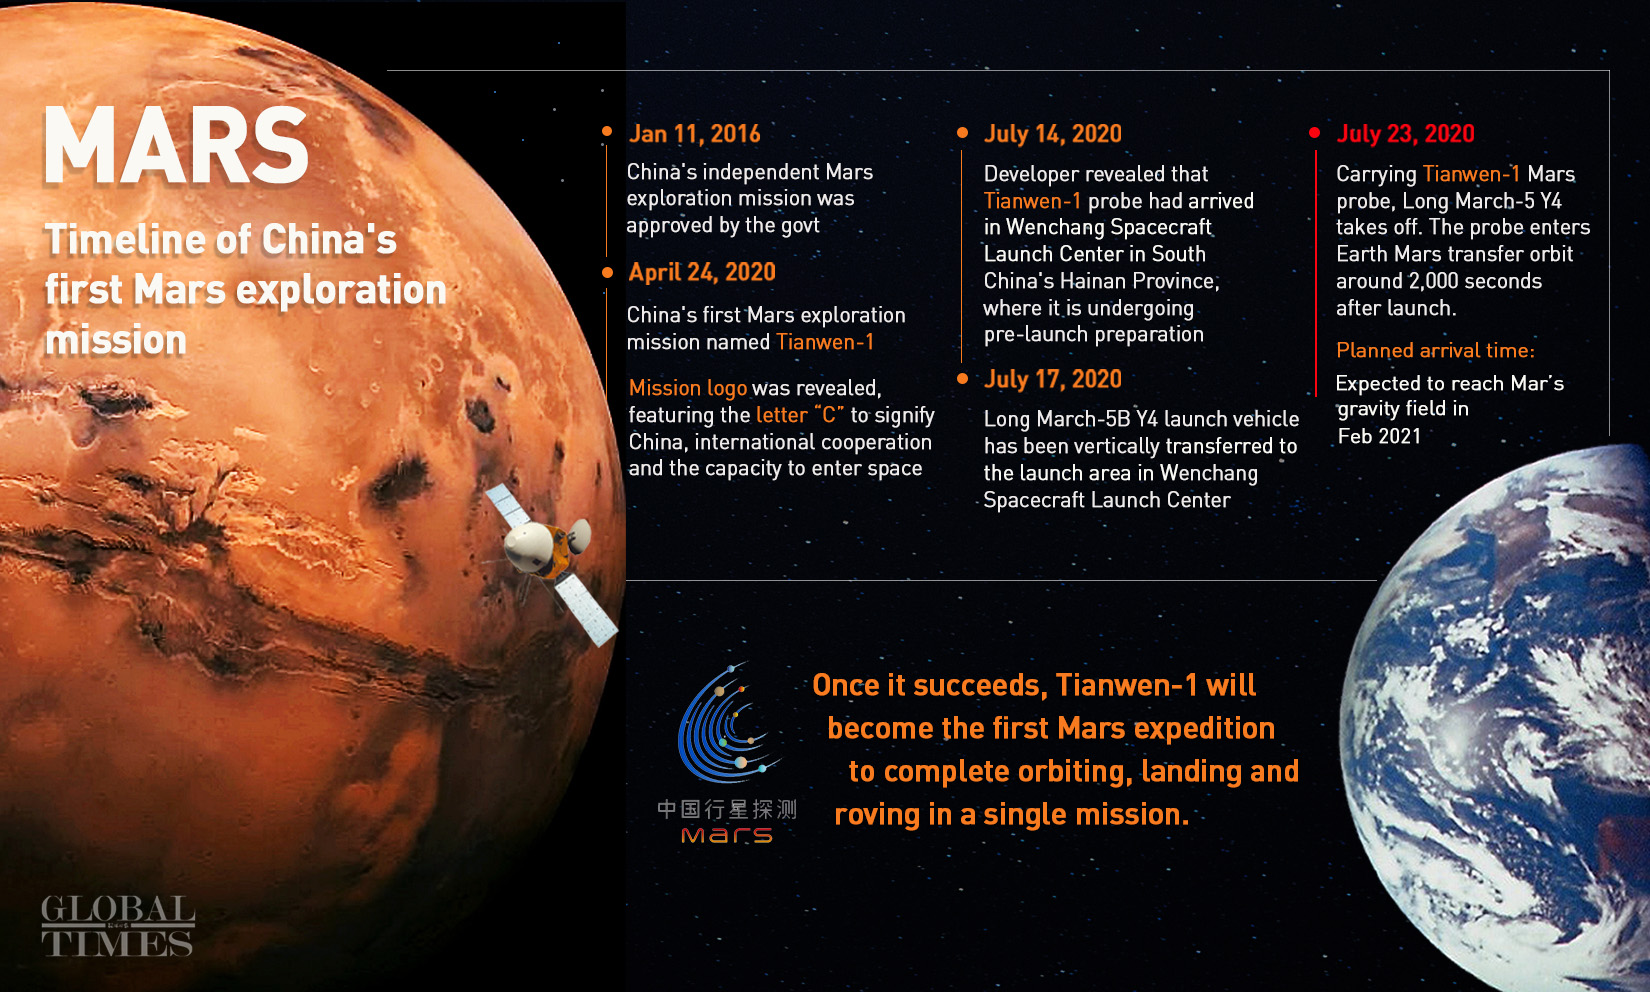 Tianwen-1 Mars orbiter and rover Timeline - Globaltimes 20200723.jpg